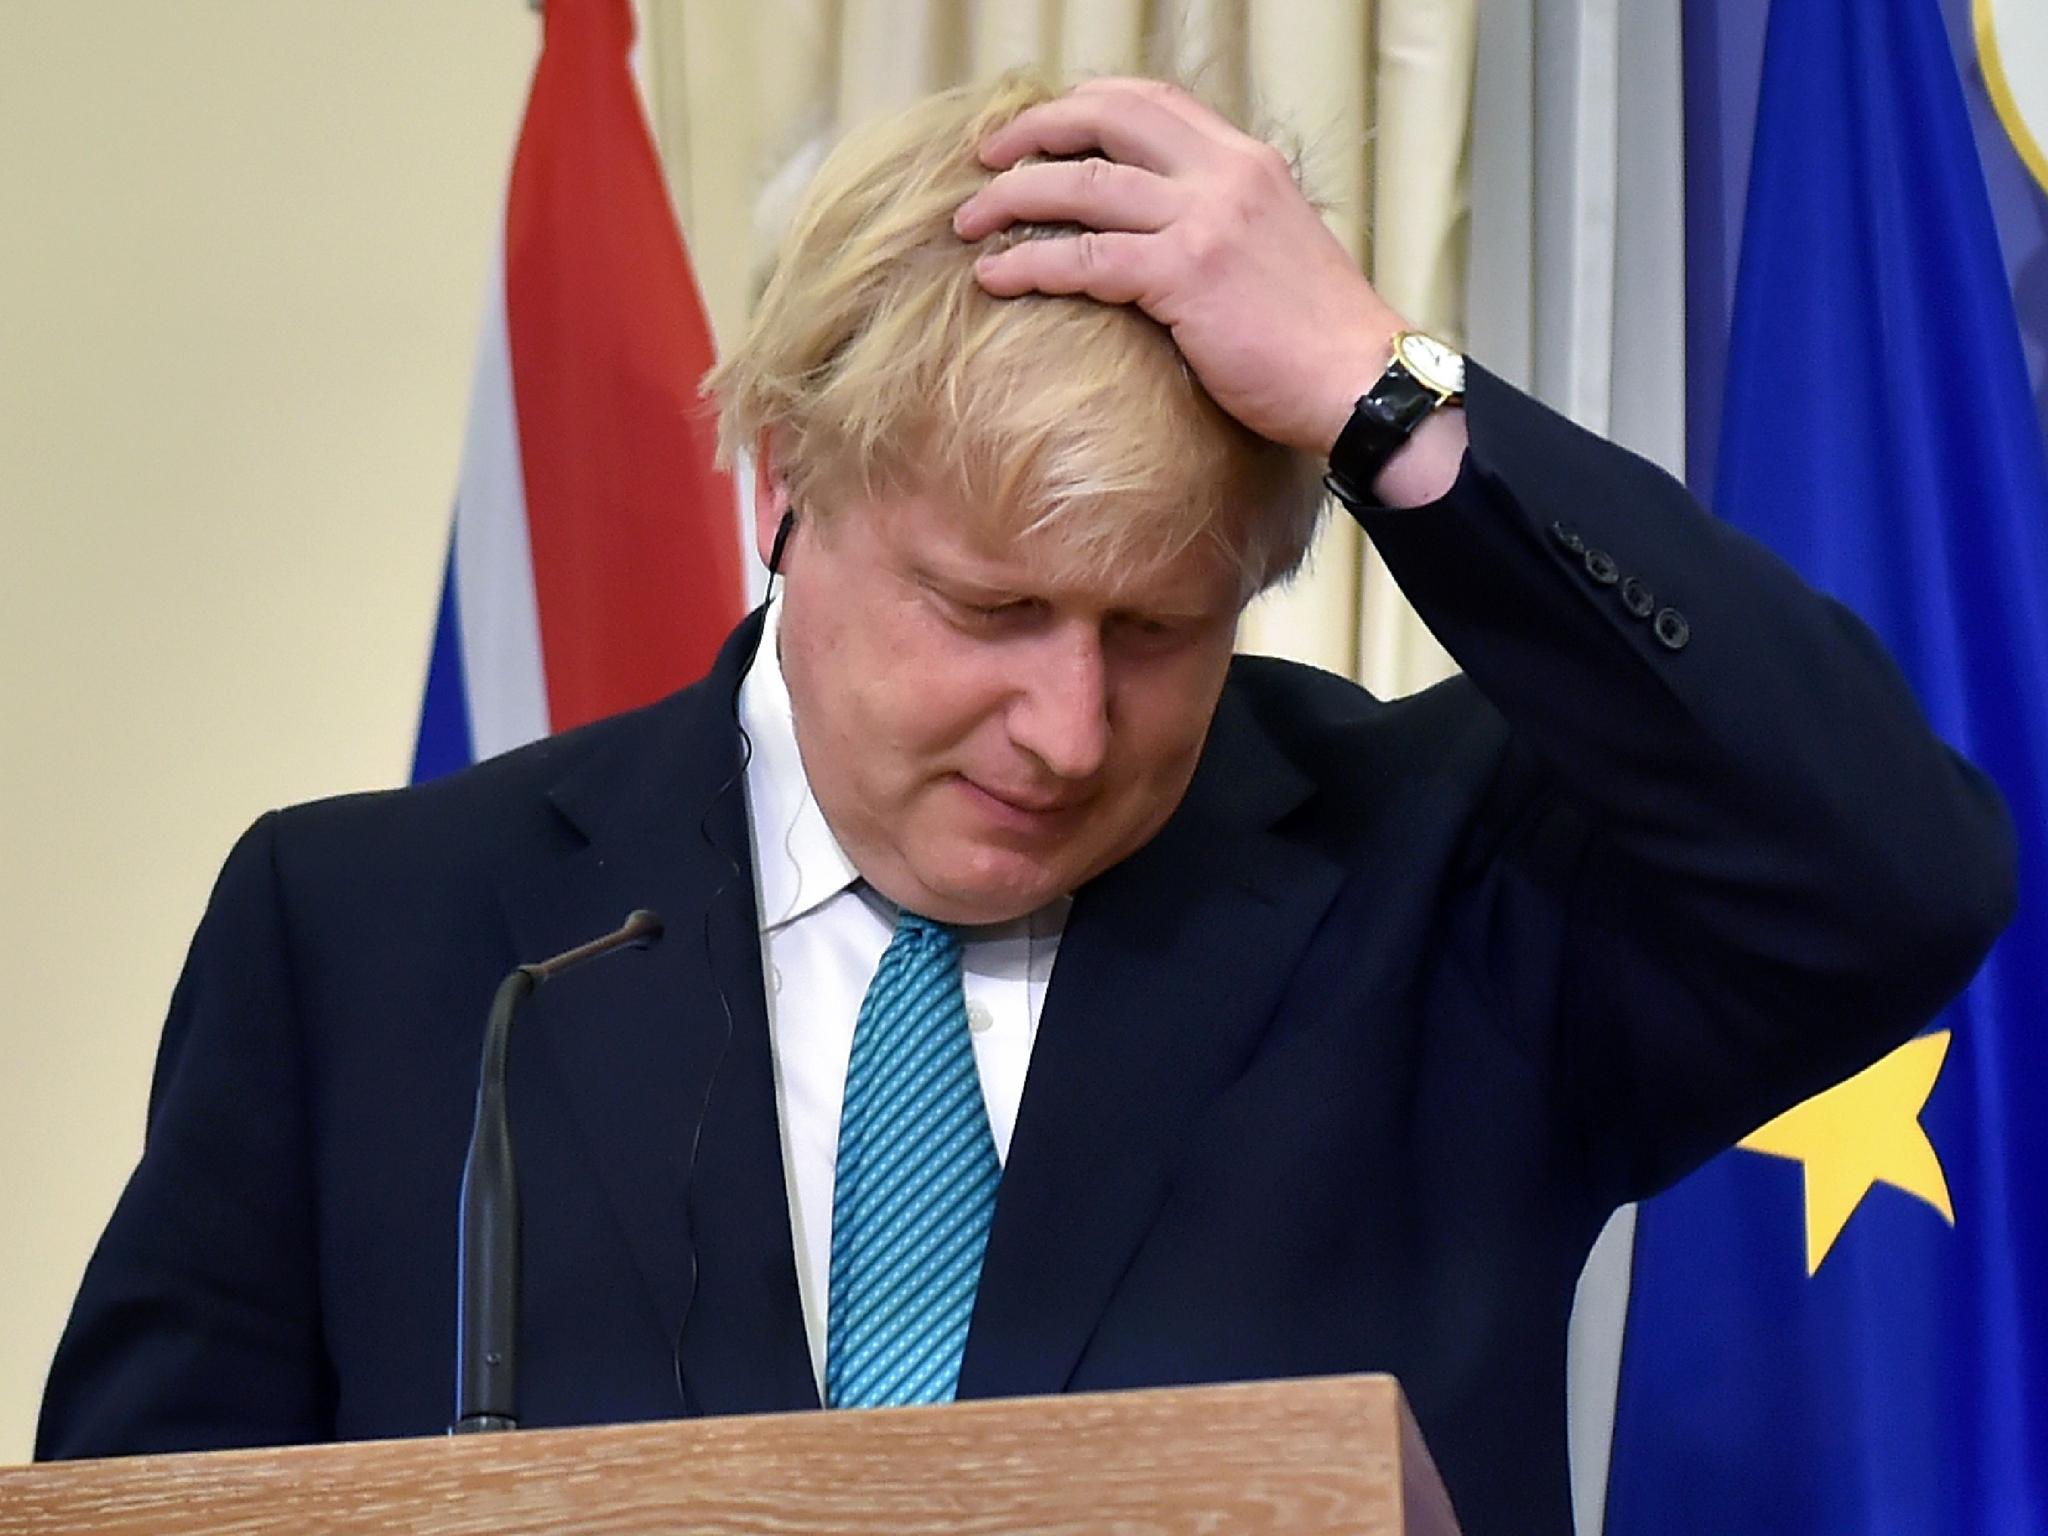 Critics have turned on Mr Johnson over the cancellation of his trip to Russia